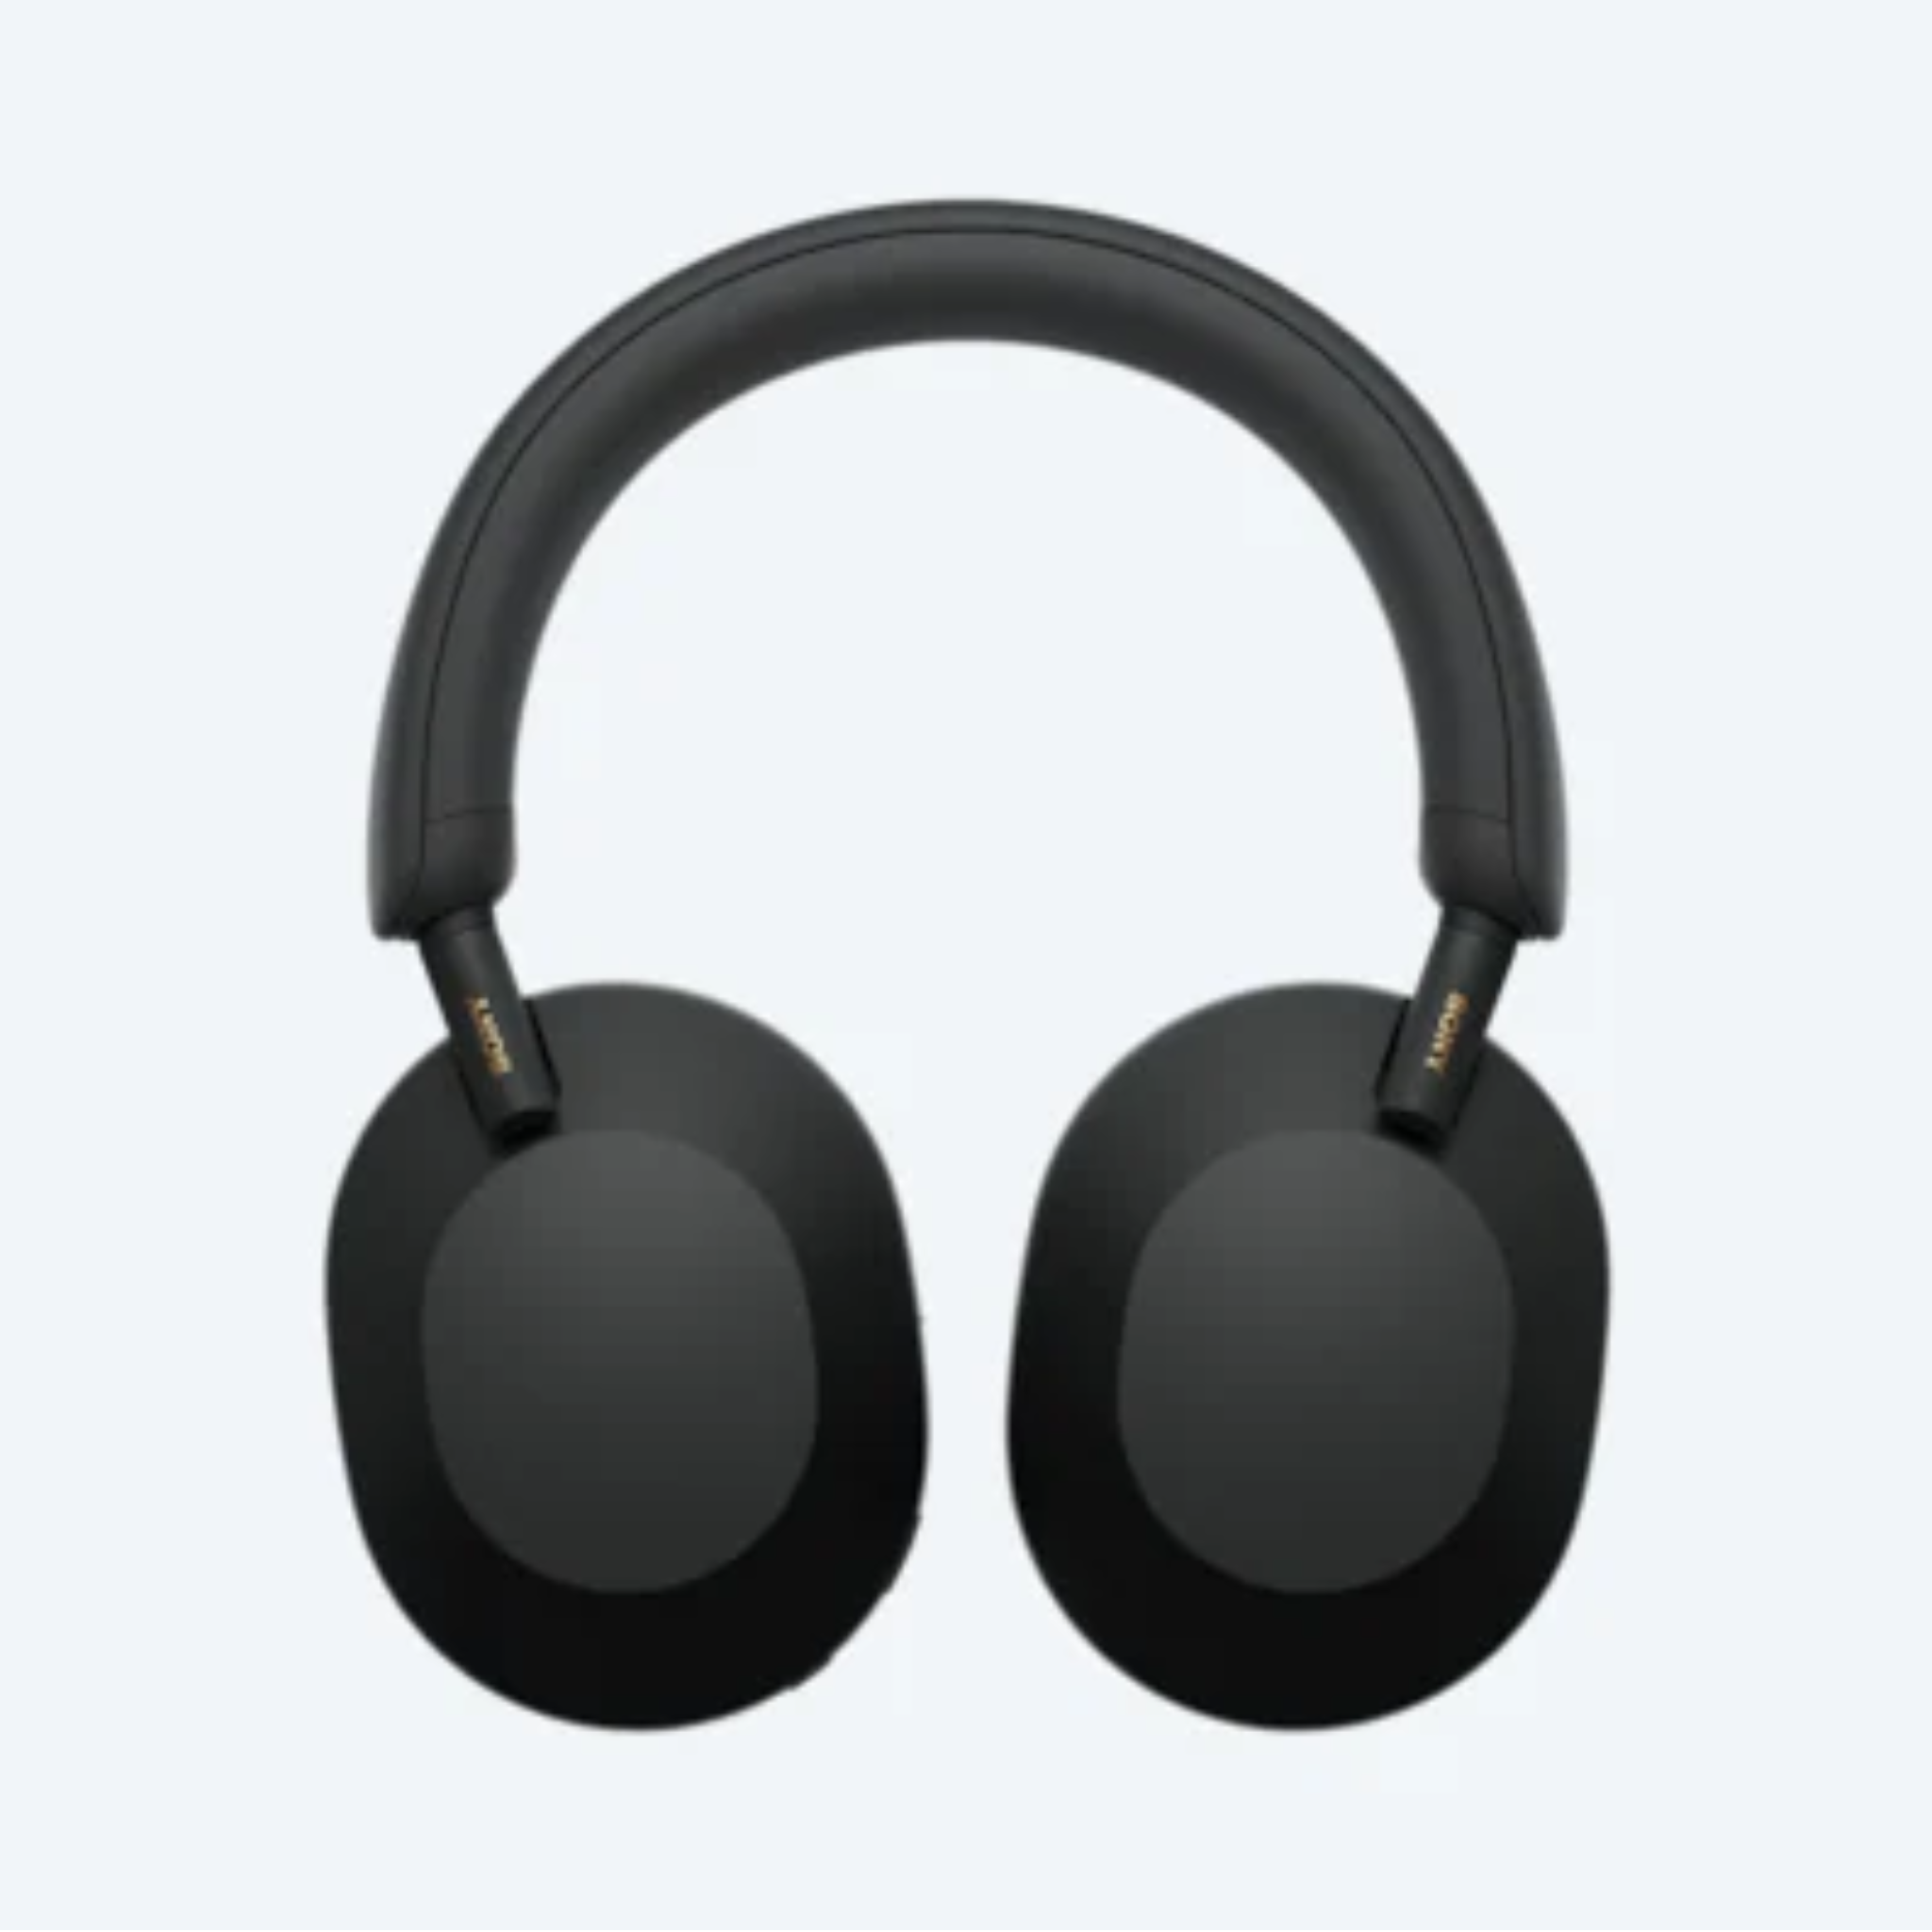 Sony WH-1000XM5 Industry Leading Noise-Canceling Wireless Headphones